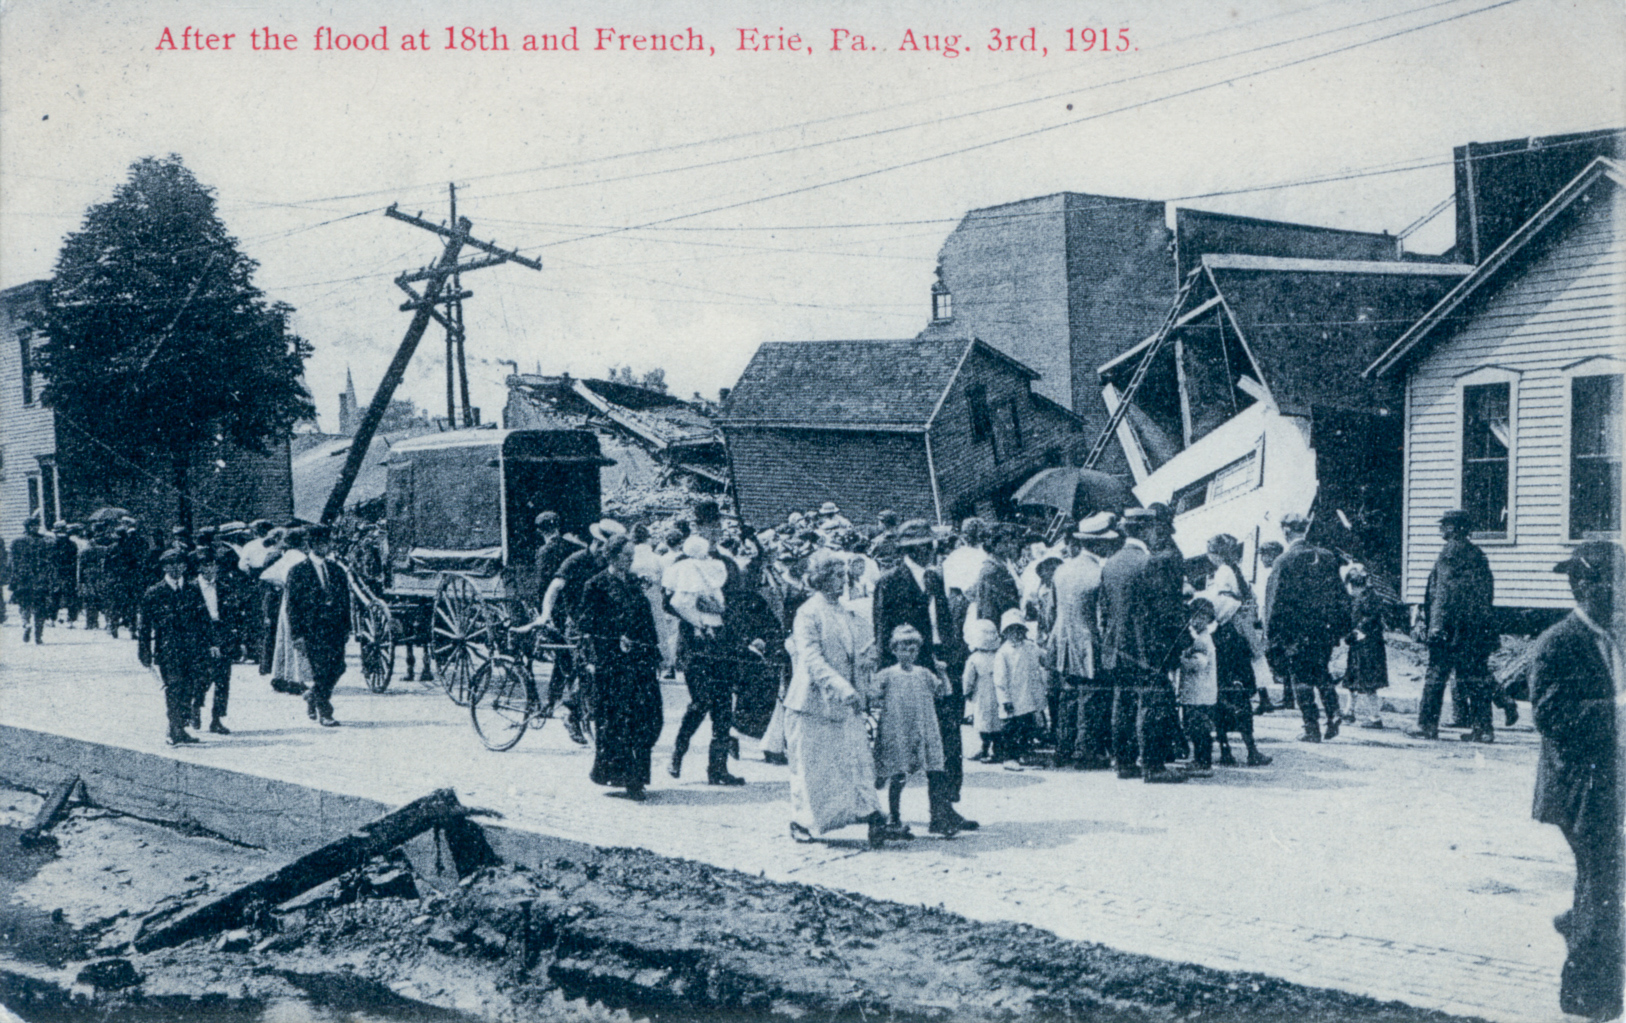 After the flood at 18th and French, Erie PA, Aug 3rd 1915